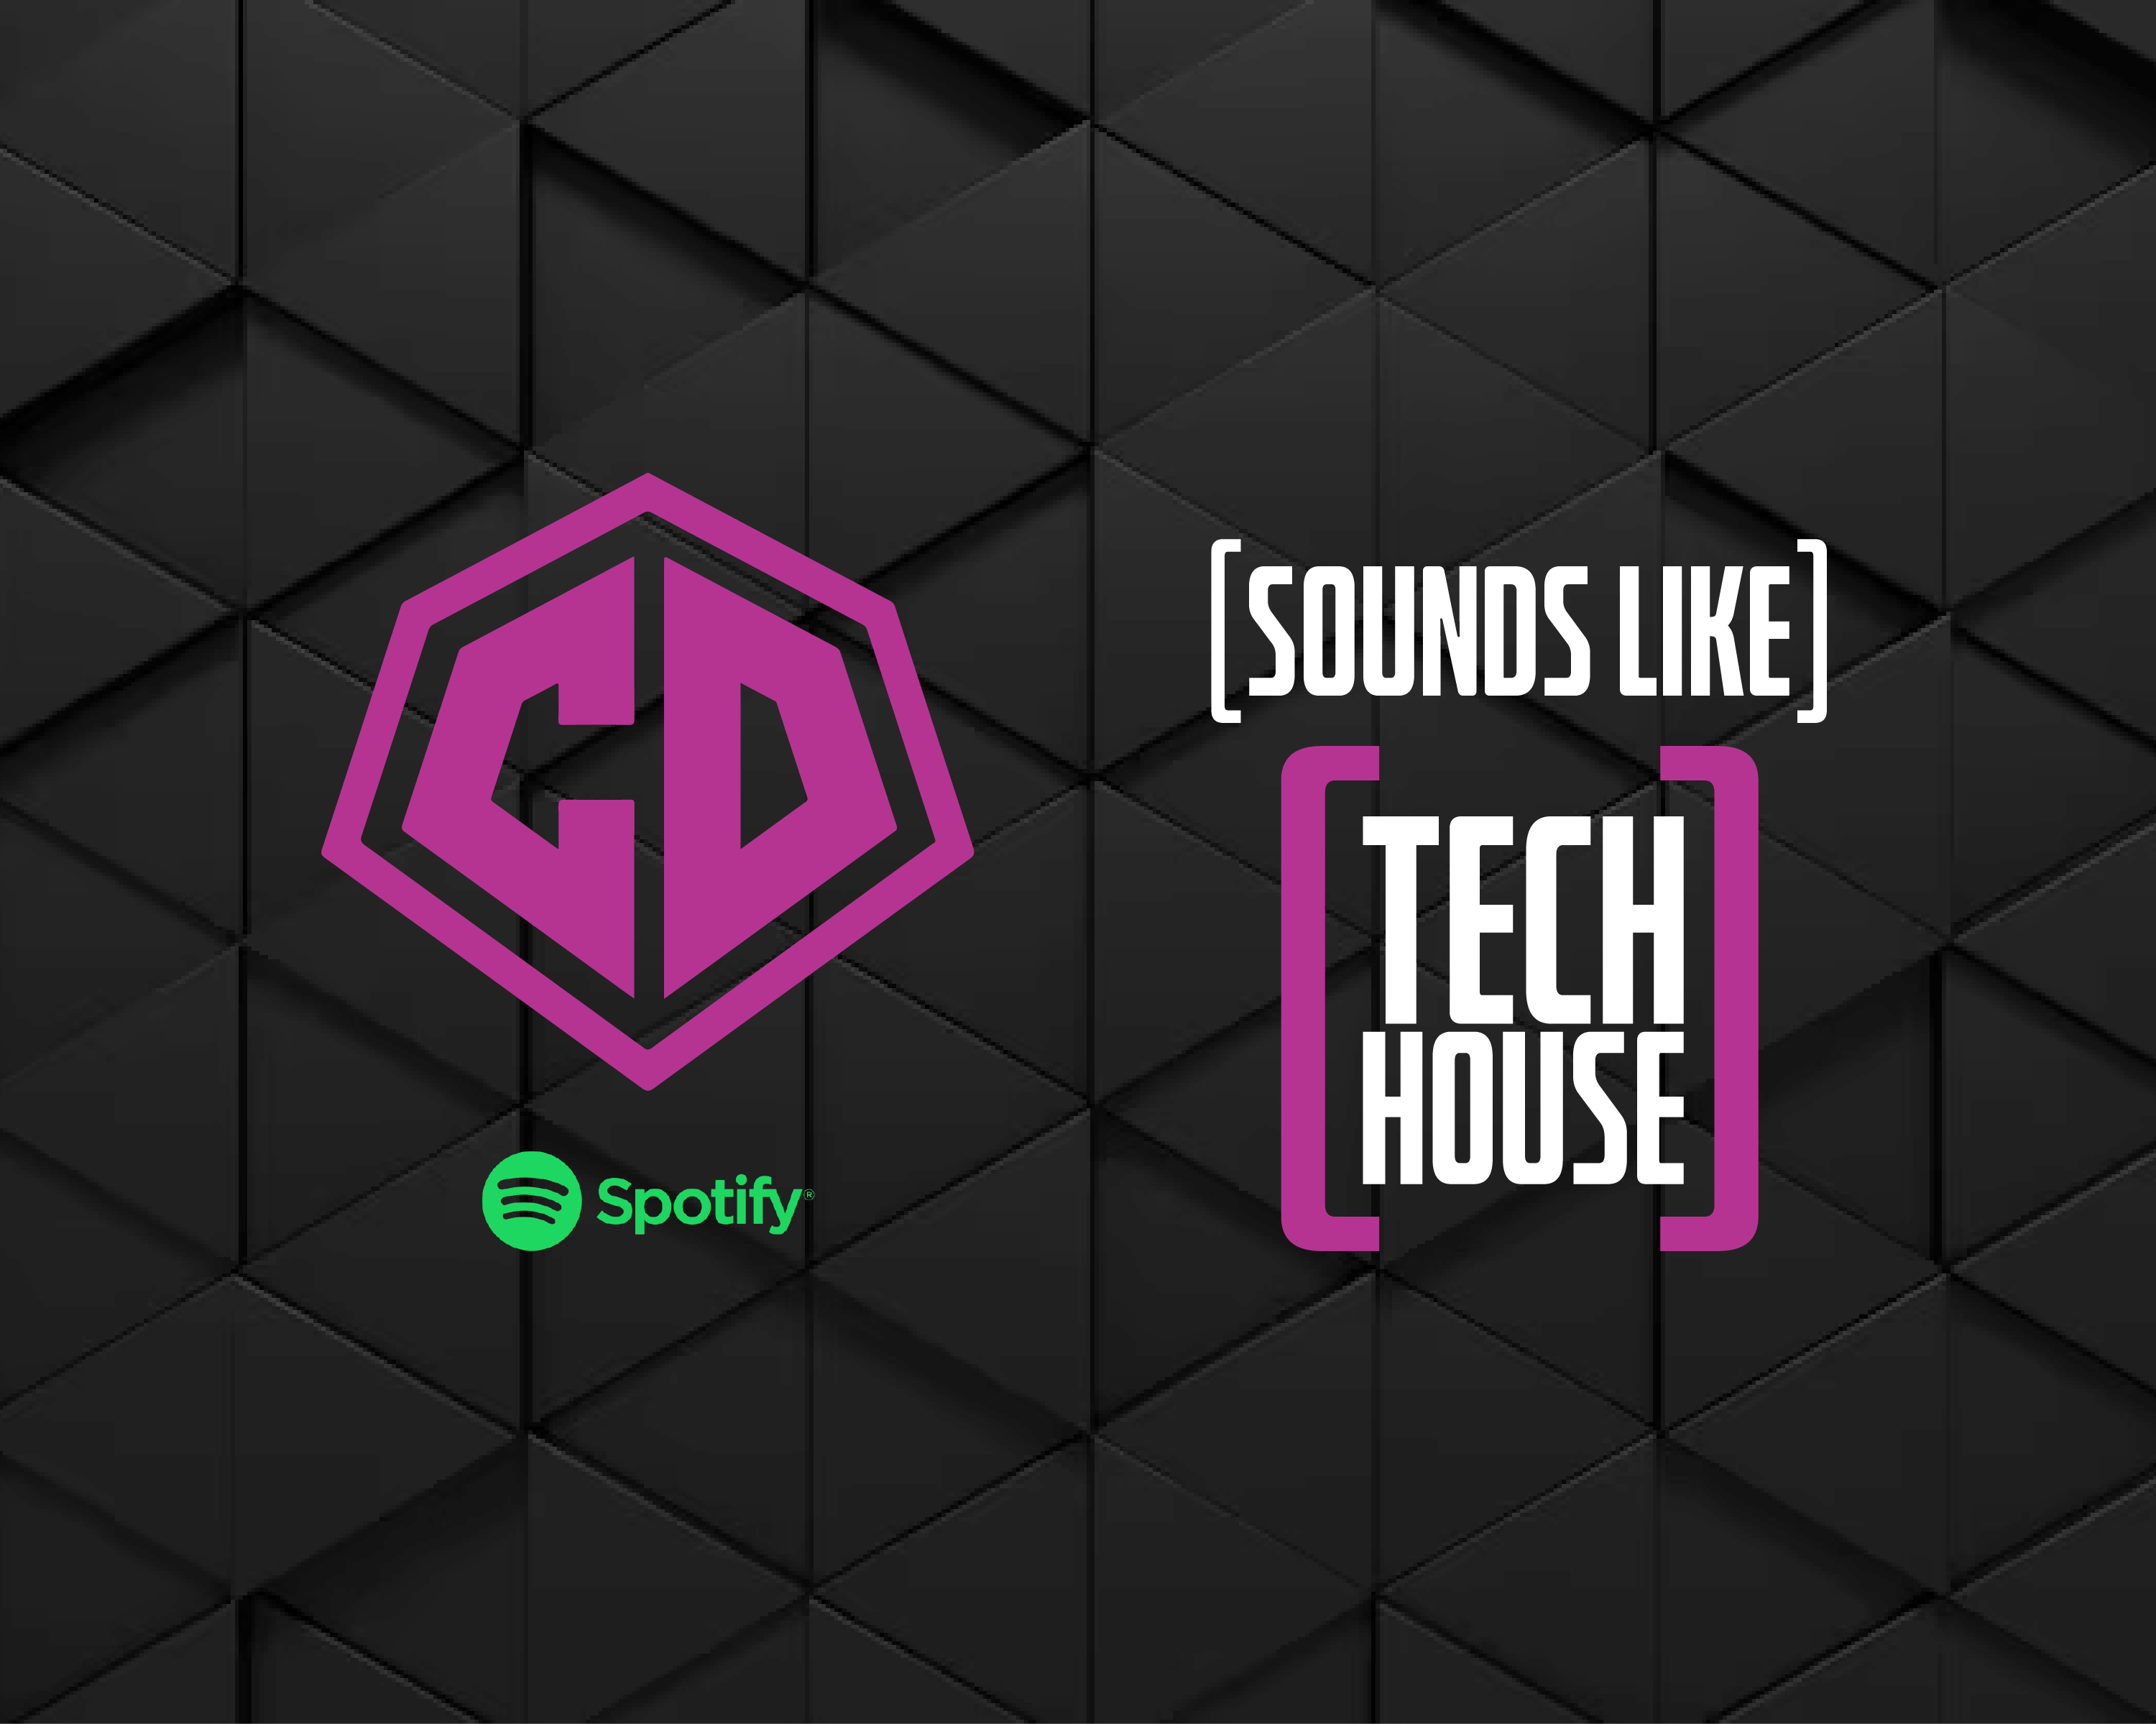 Sounds Like... Tech House - Curated Cease & Desist Playlist on Spotify